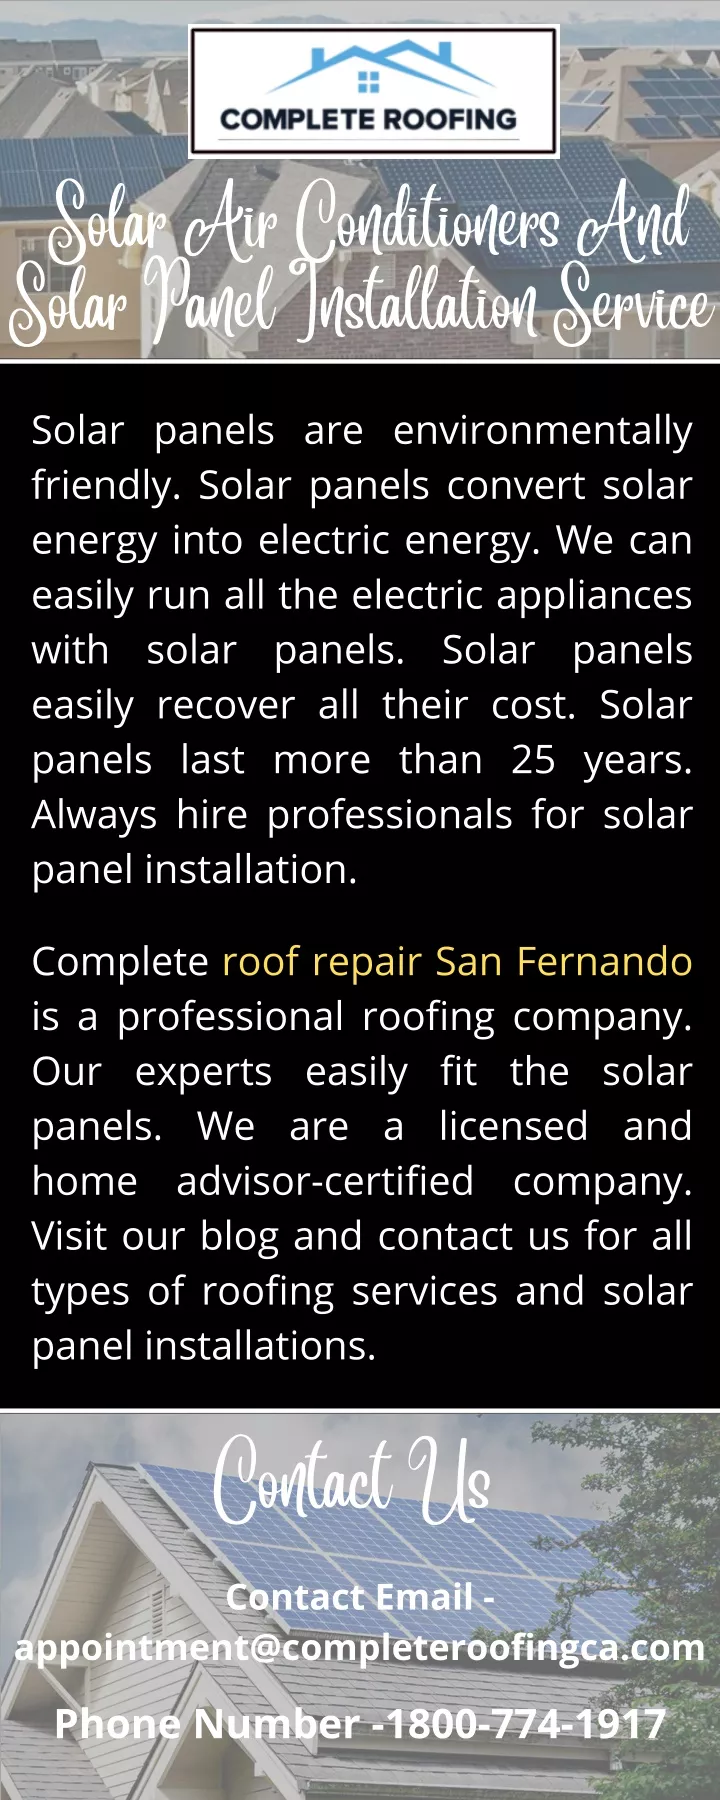 solar air conditioners and solar panel